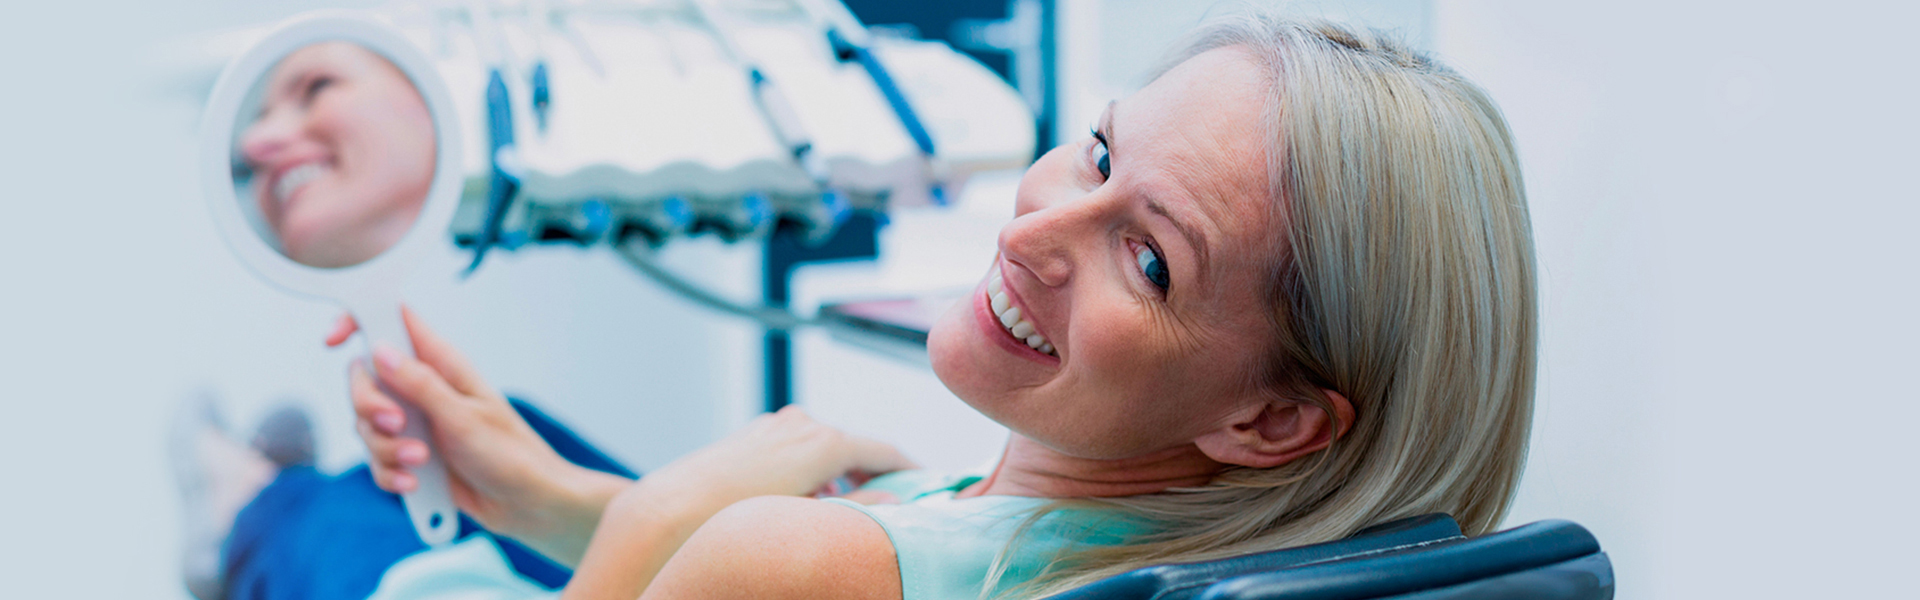 Root Canal and Crown vs. Implant: How does one decide?